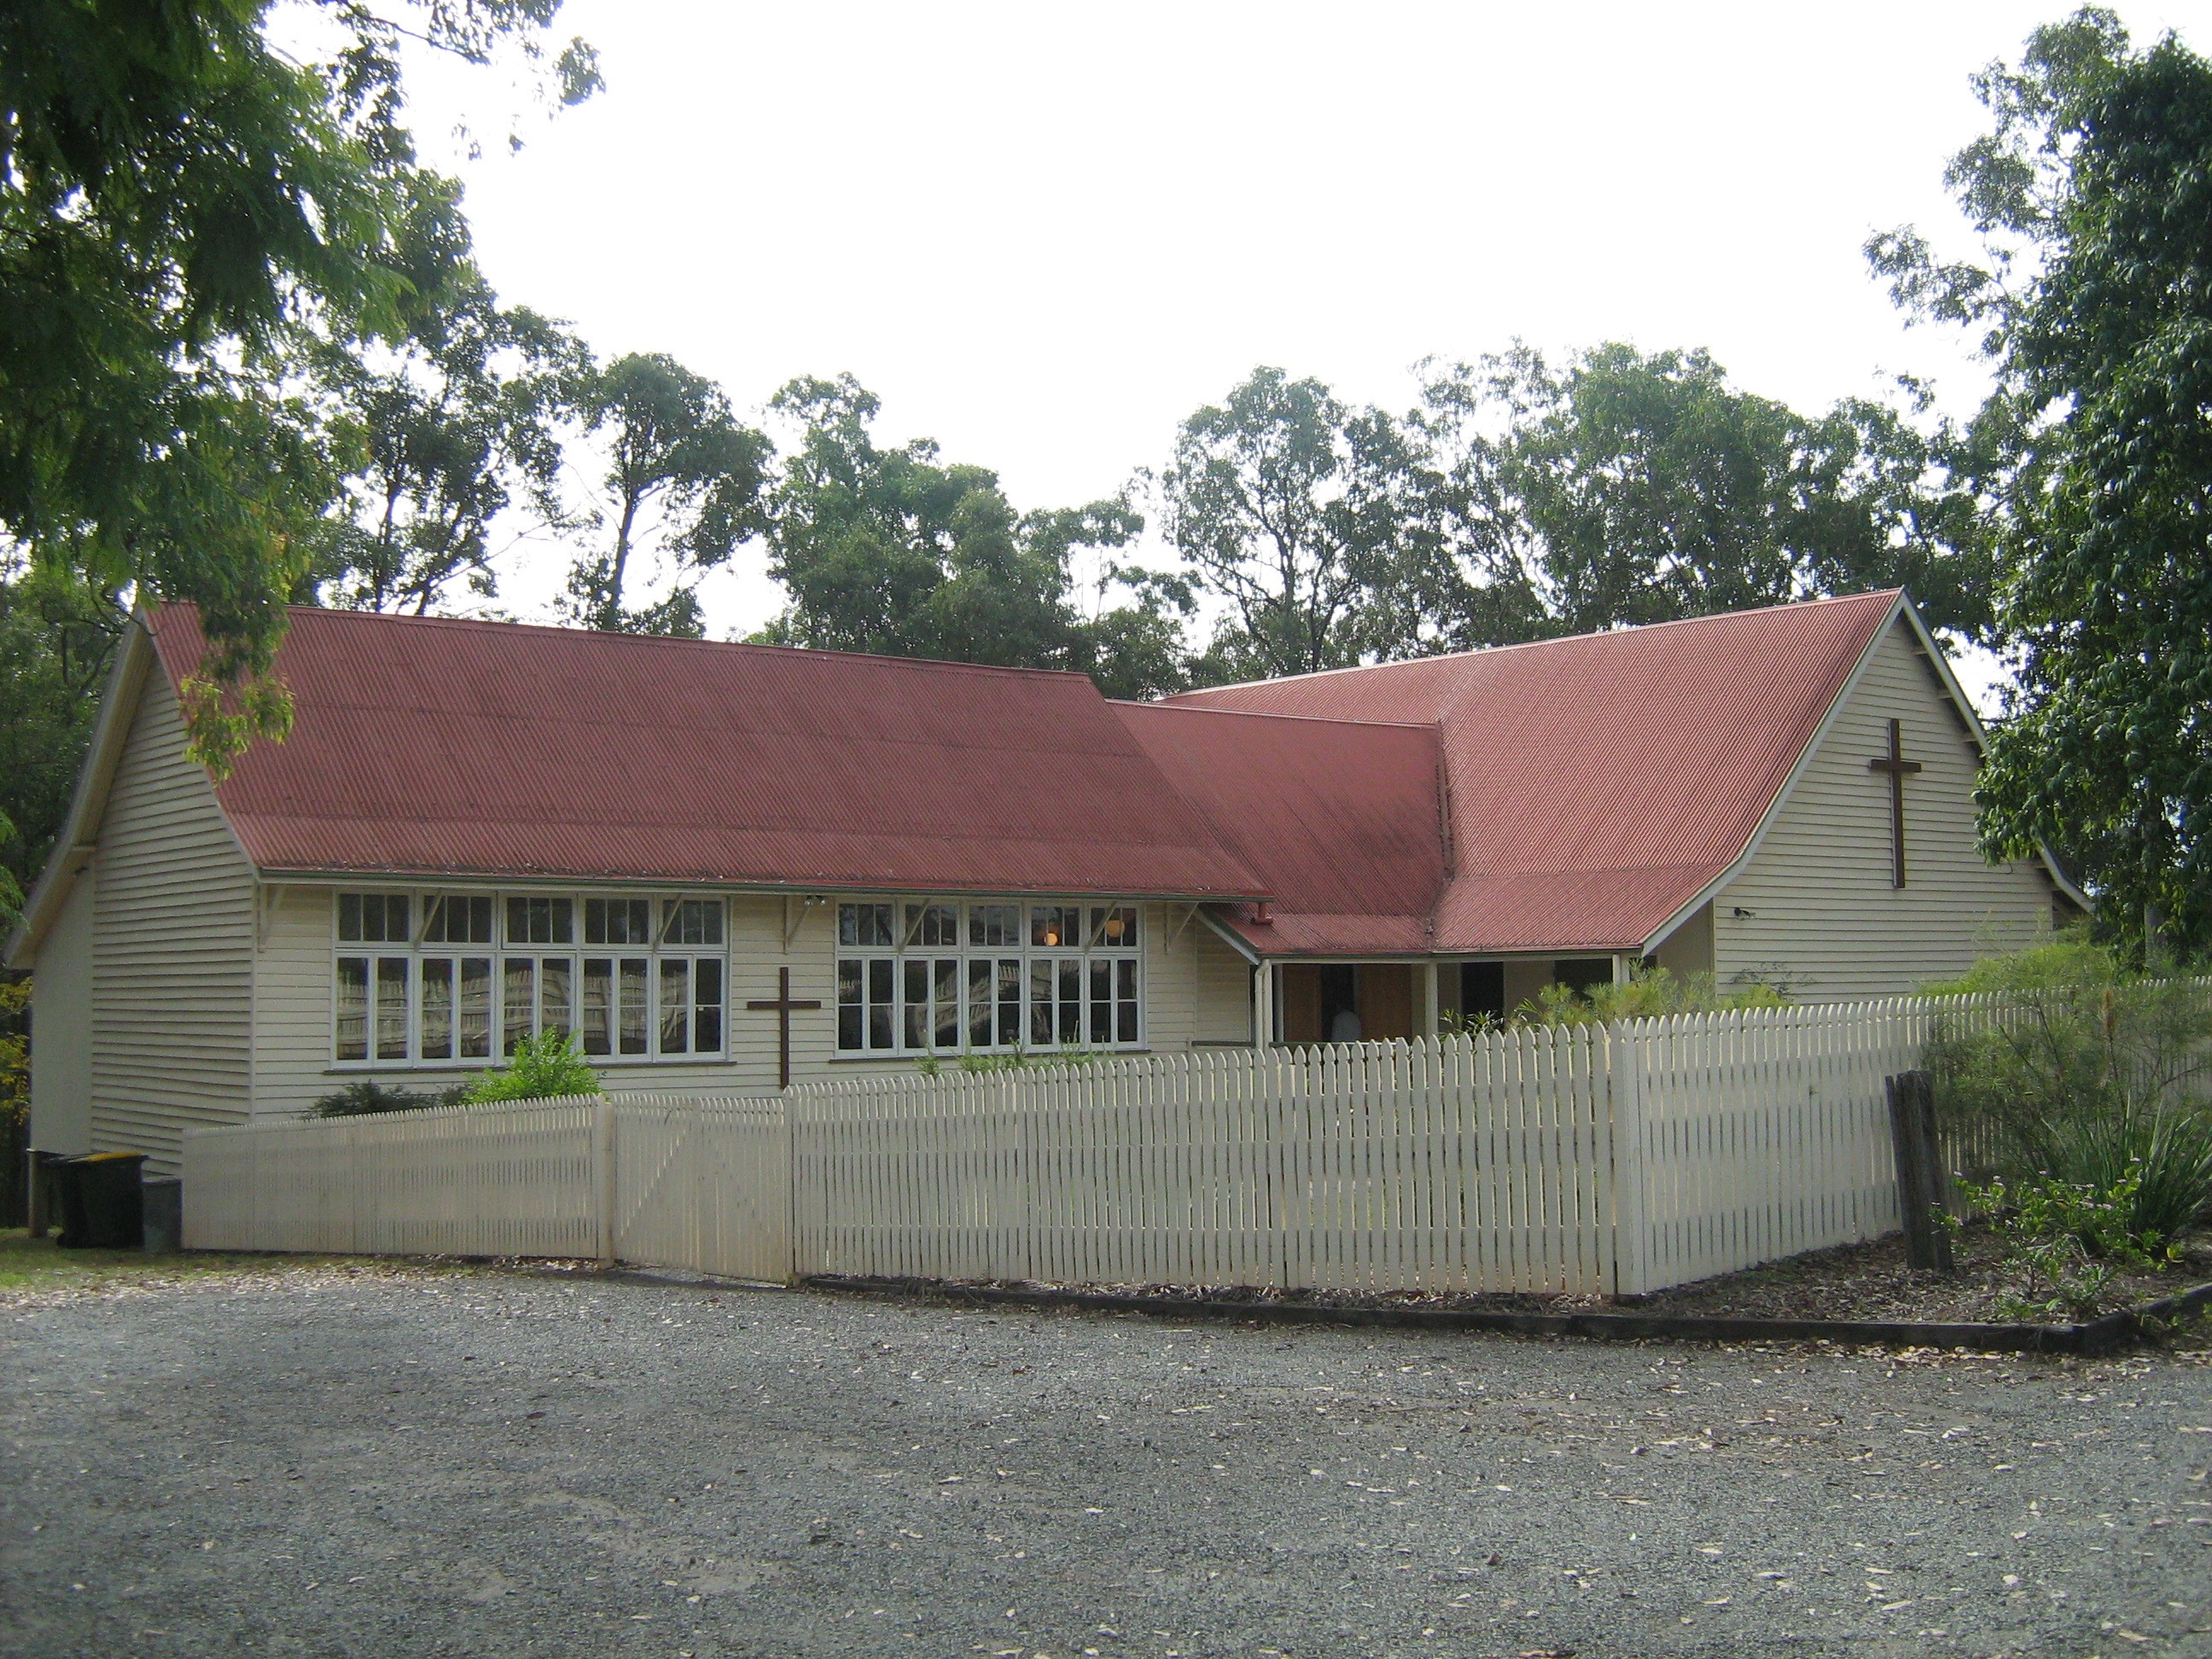 This is an image of the Heritage Place known as the St. Michaels and All Angels' Anglican Church located at 3407 Moggill Road in Moggill